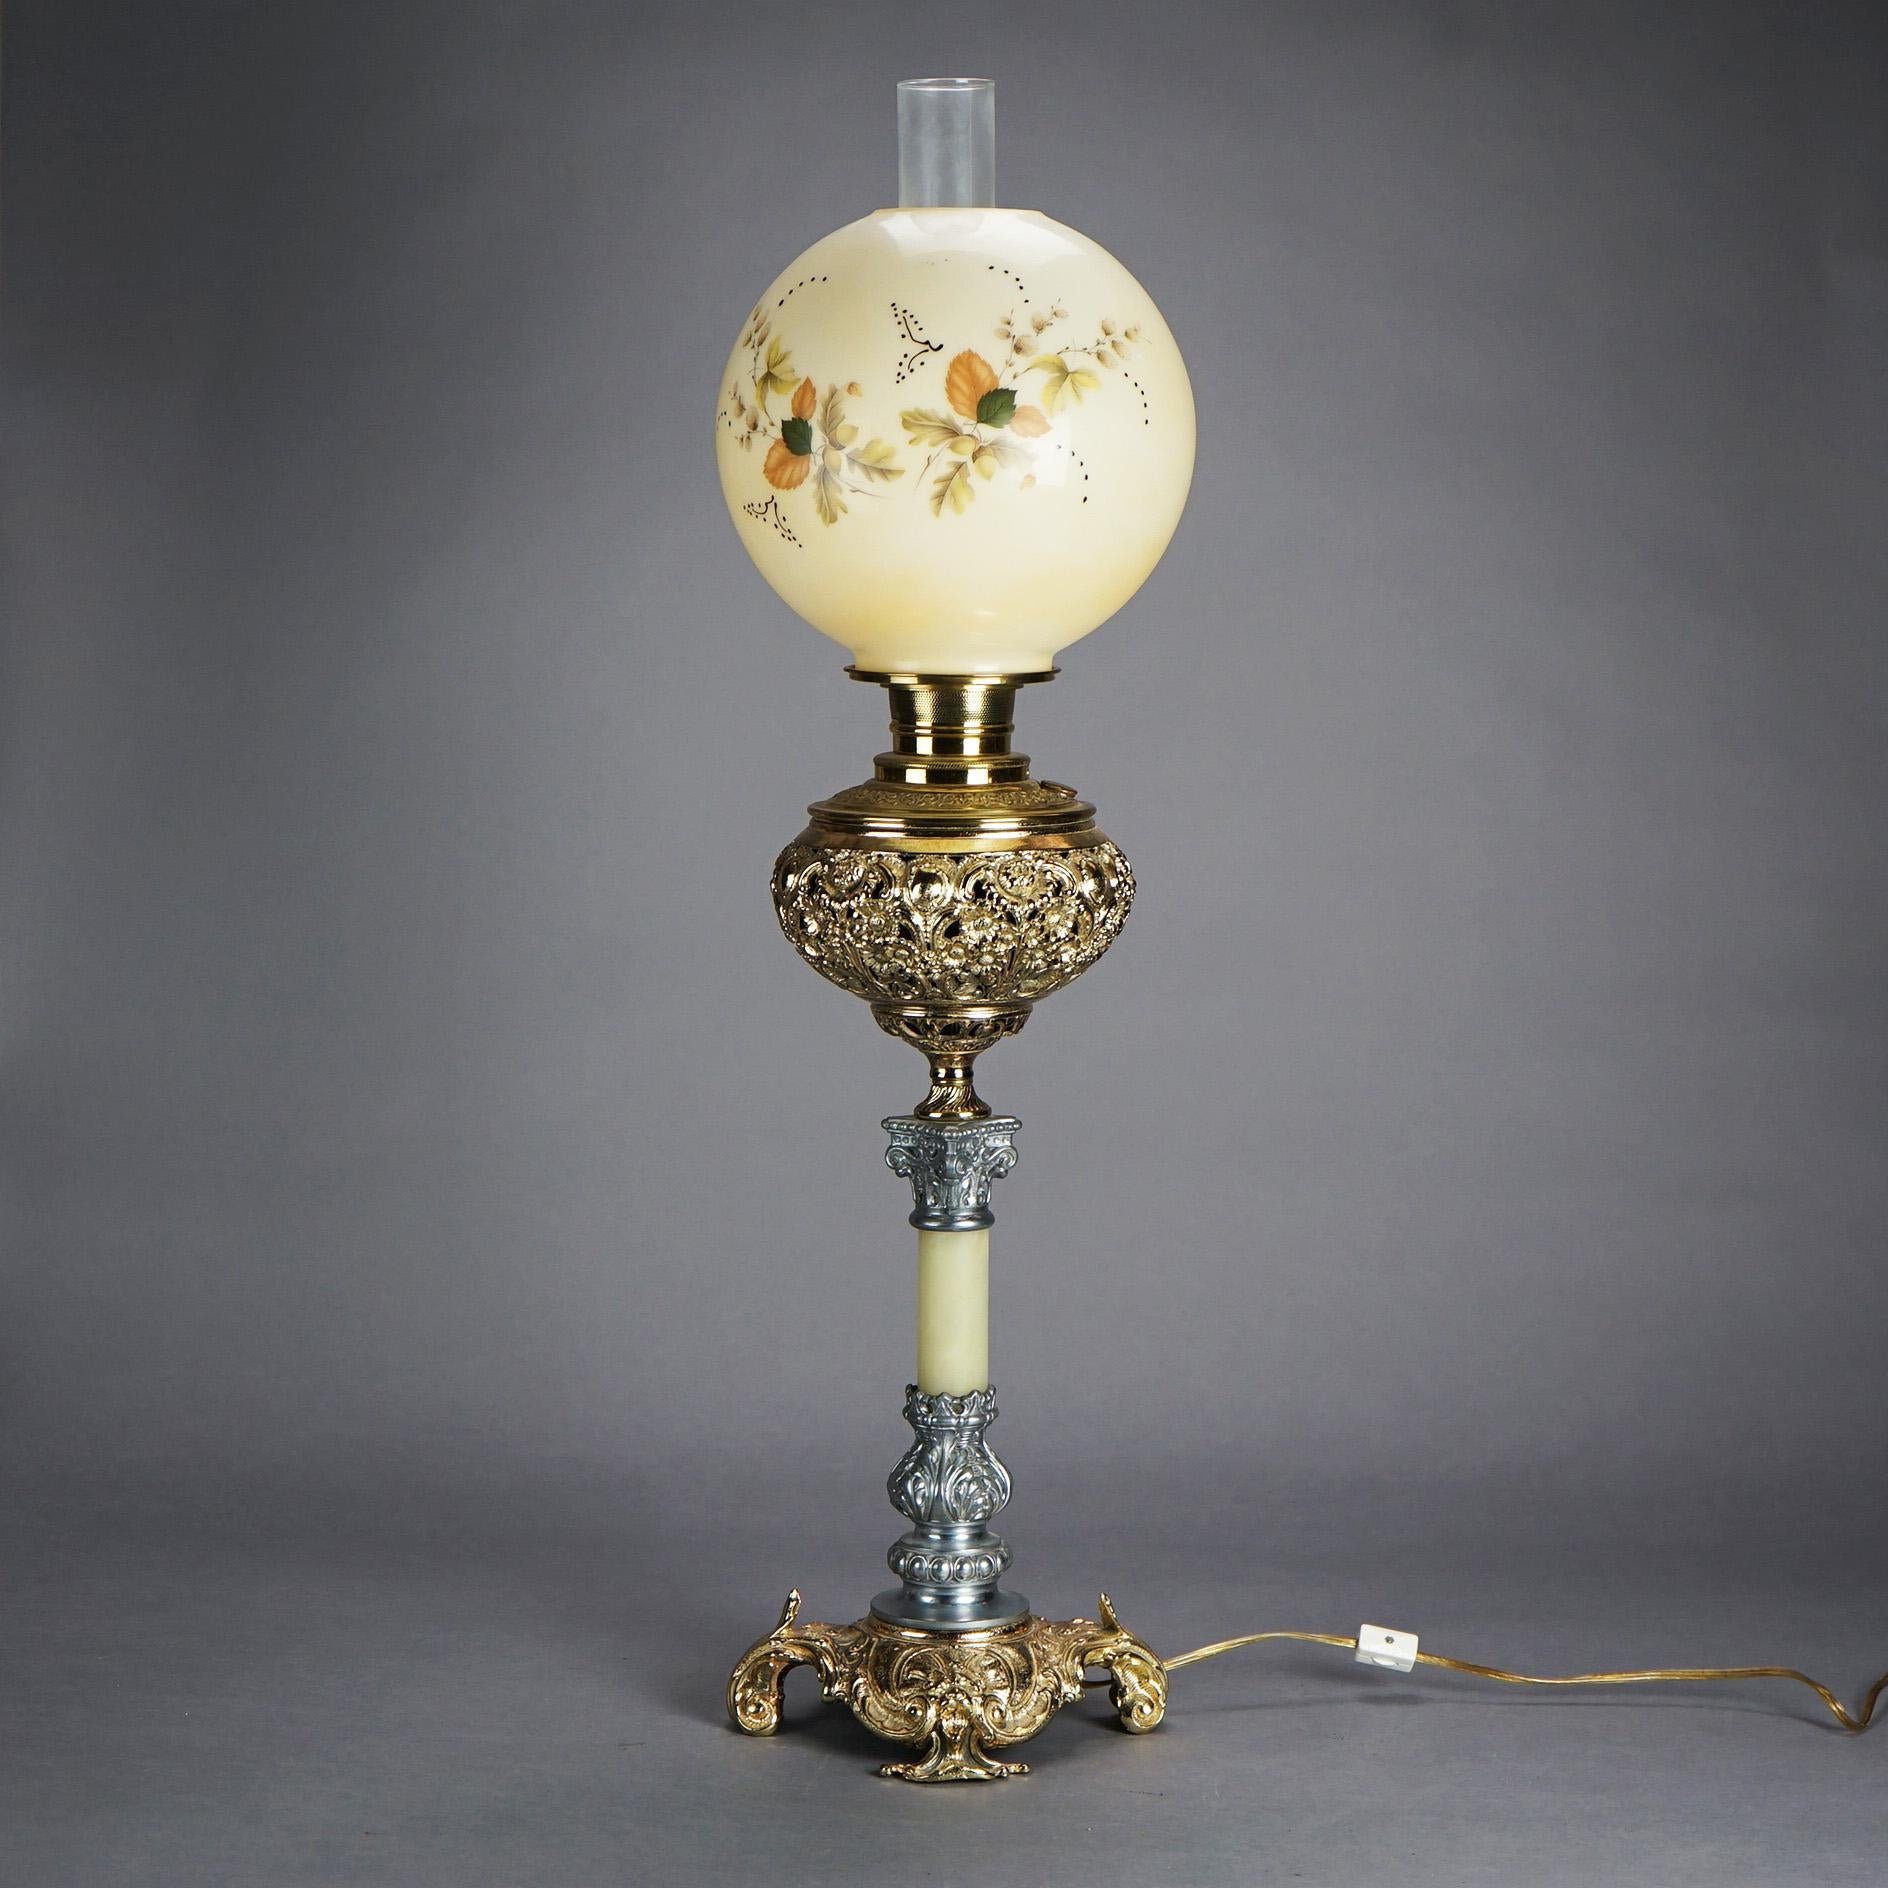 American Antique Gilt Metal & Onyx Victorian Parlor Lamp & Hand Painted Shade, c1890 For Sale